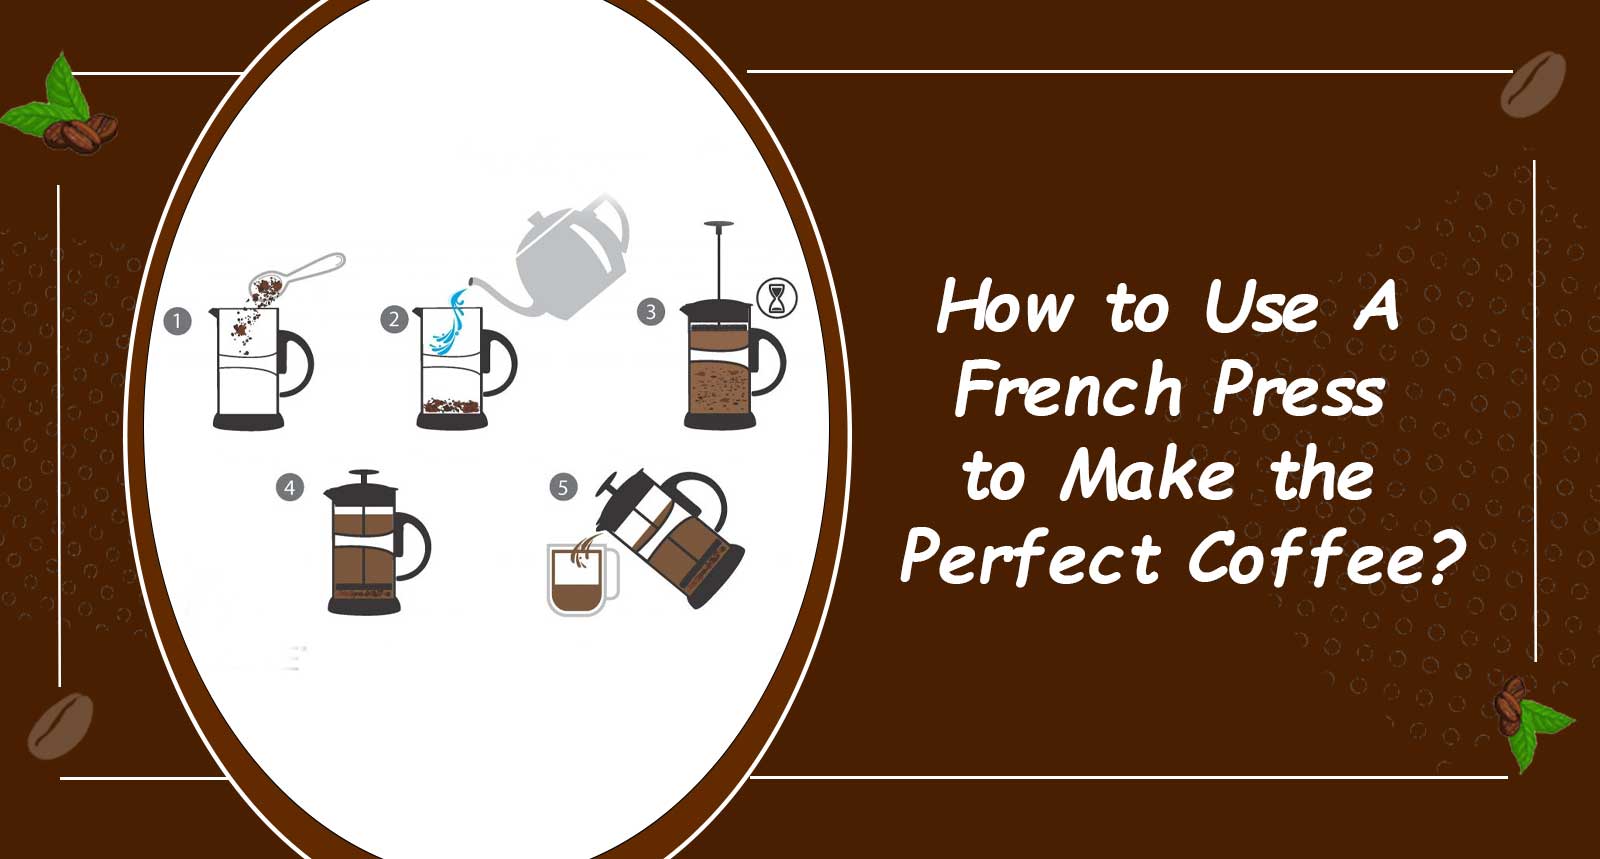 How to Use A French Press to Make the Perfect Coffee?